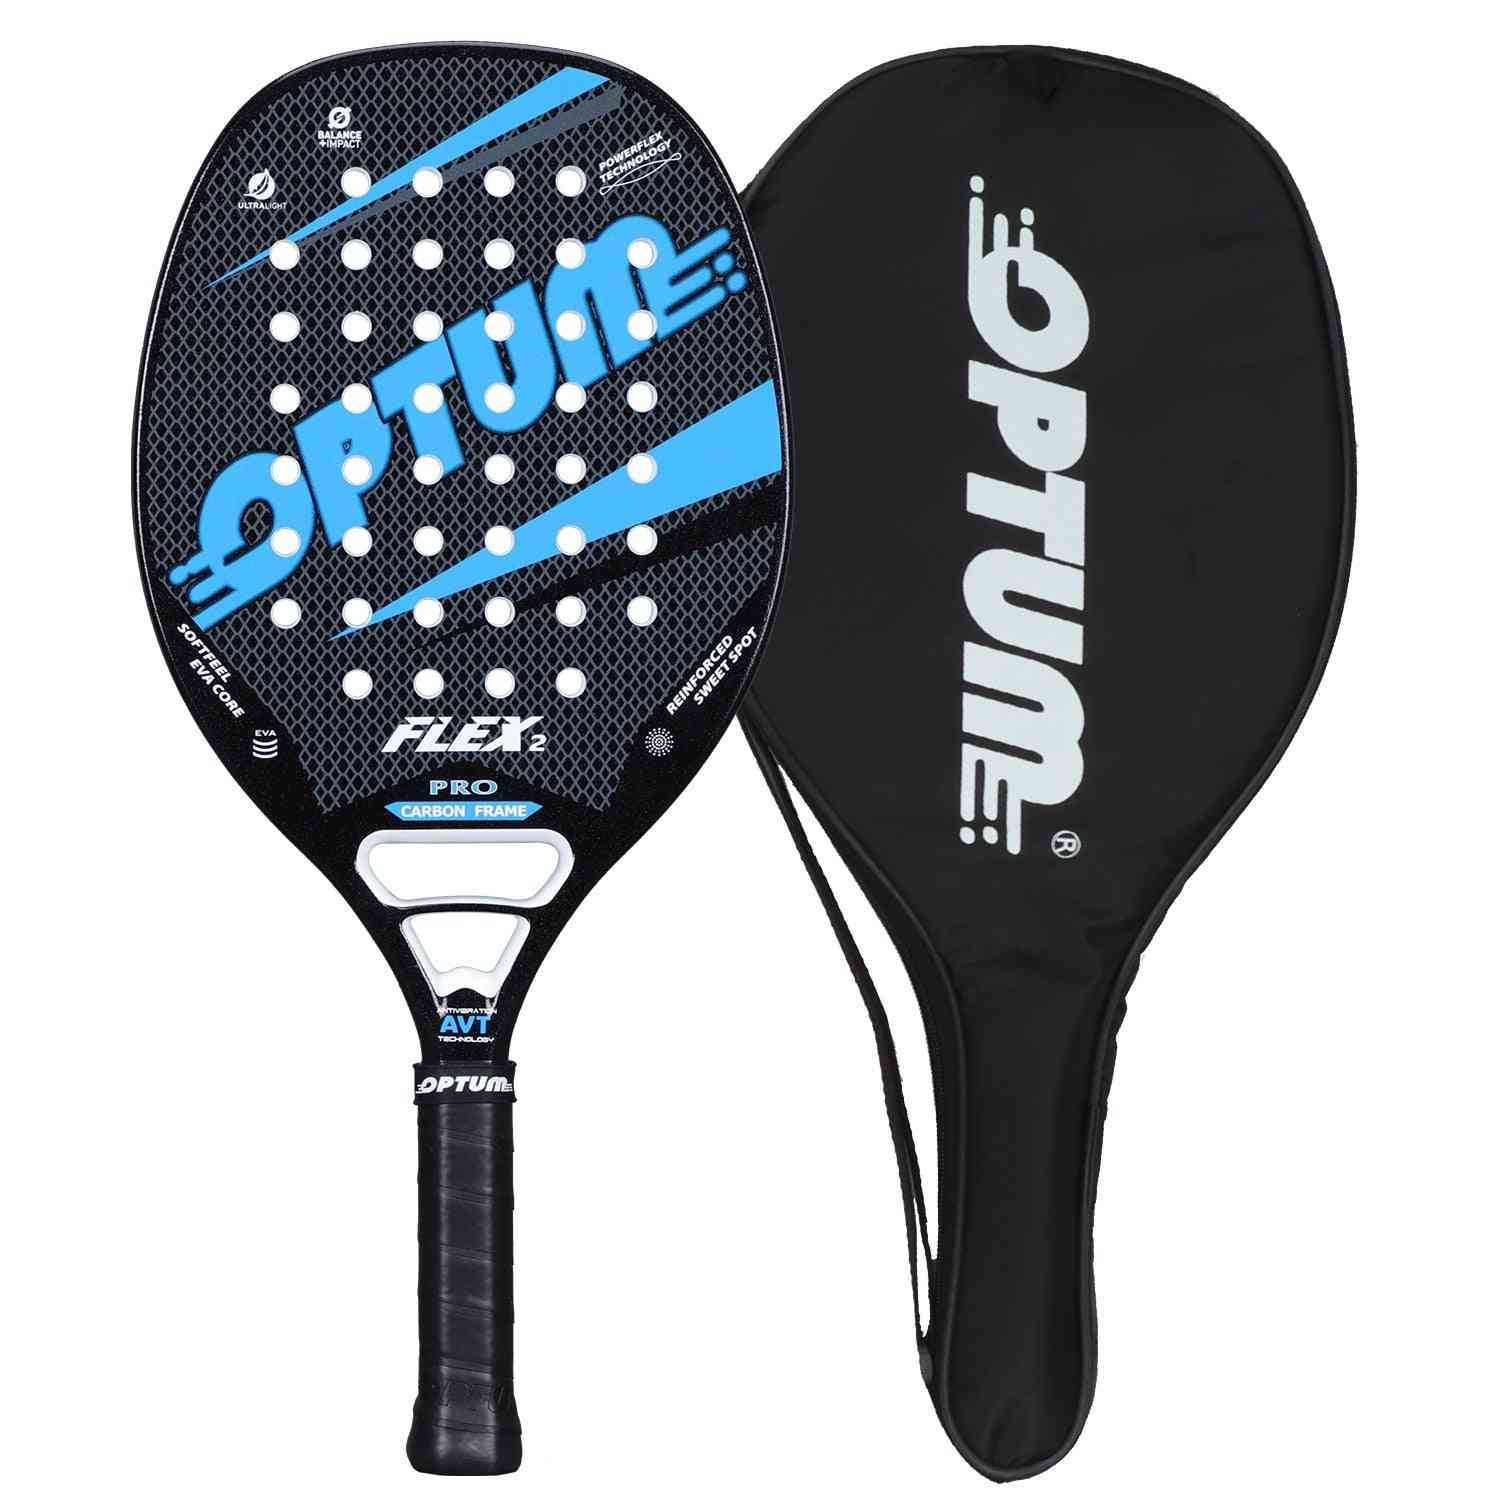 Carbon Fiber Frame Grit Face With Eva Memory Foam Core Beach Tennis Racket With Cover Bag